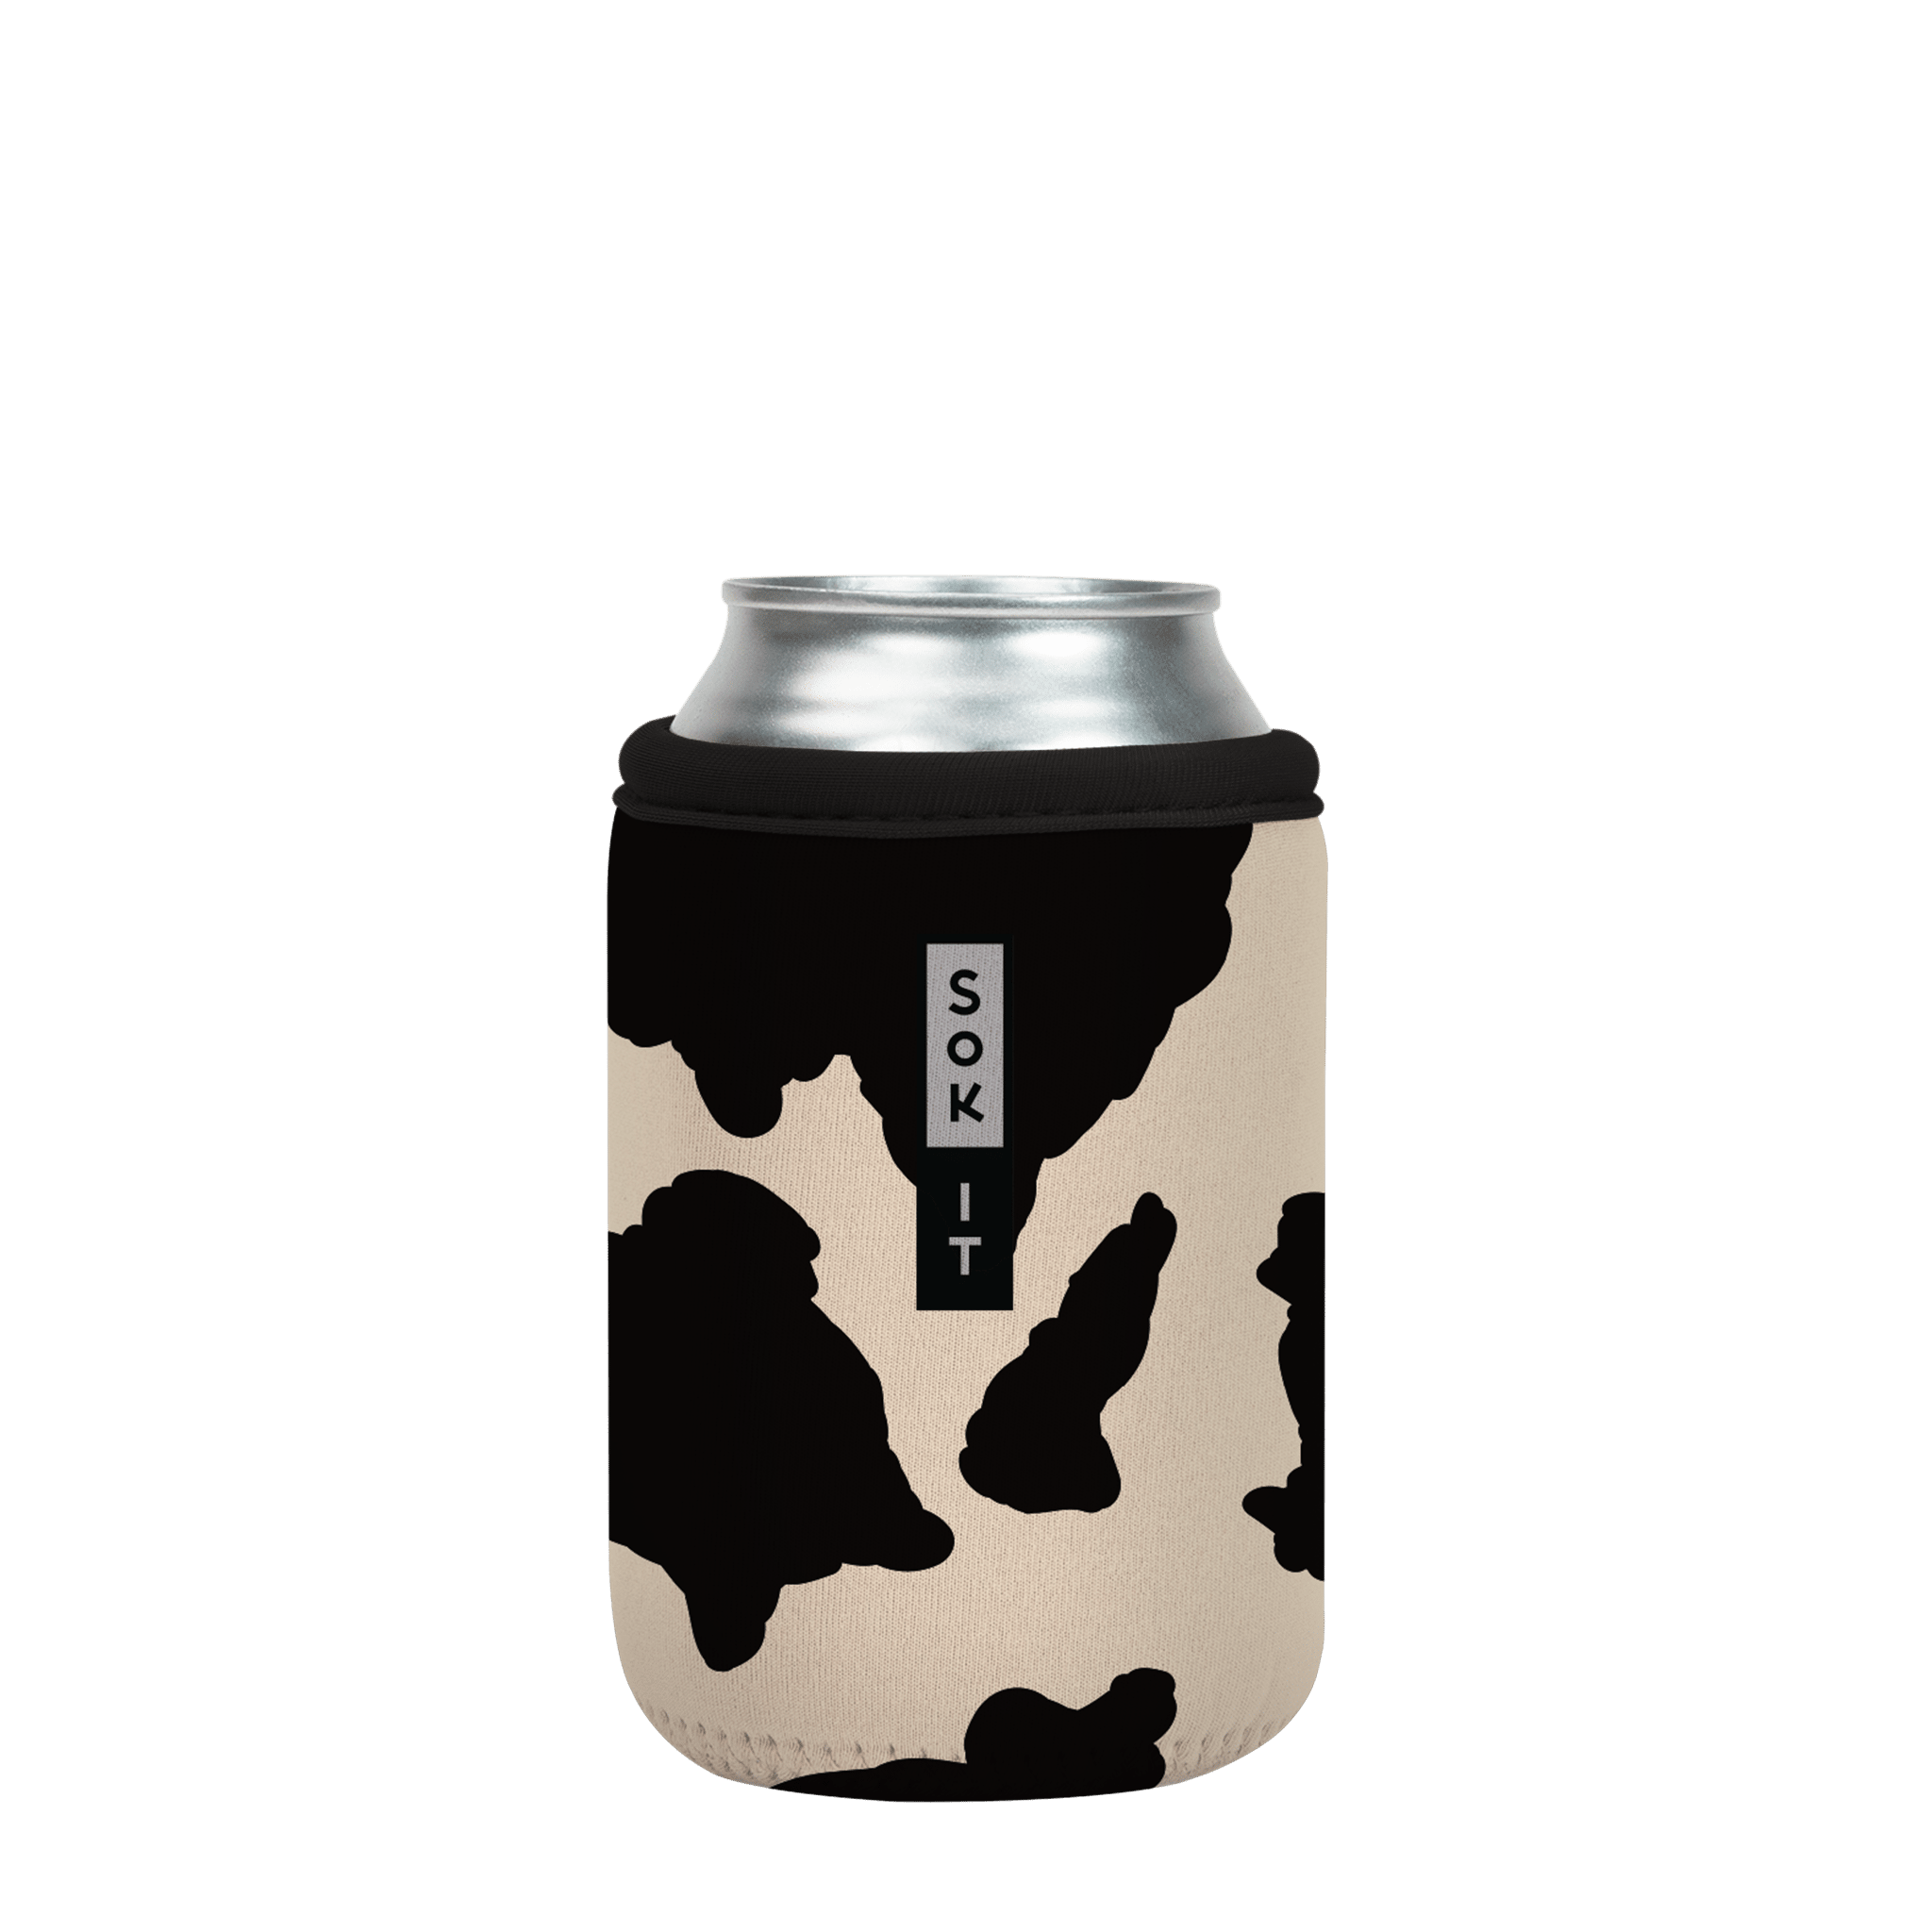 CanSok Cow Print 12oz Can